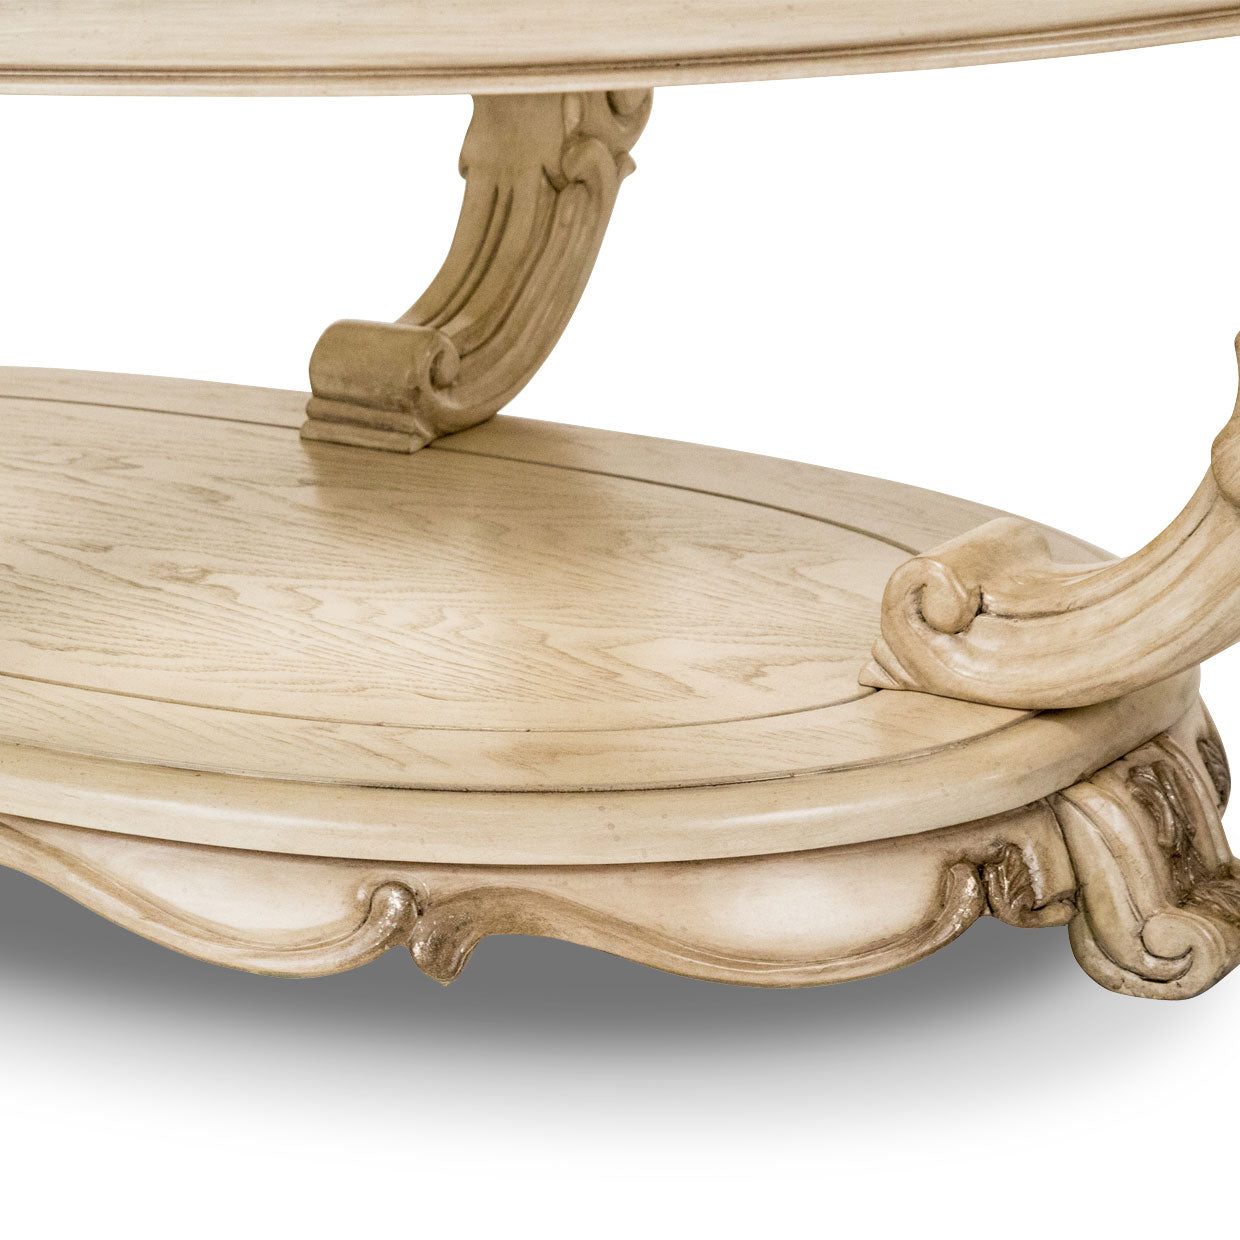 PLATINE DE ROYALE CHAMPAGNE Oval Cocktail Table Champagne - Dream art Gallery